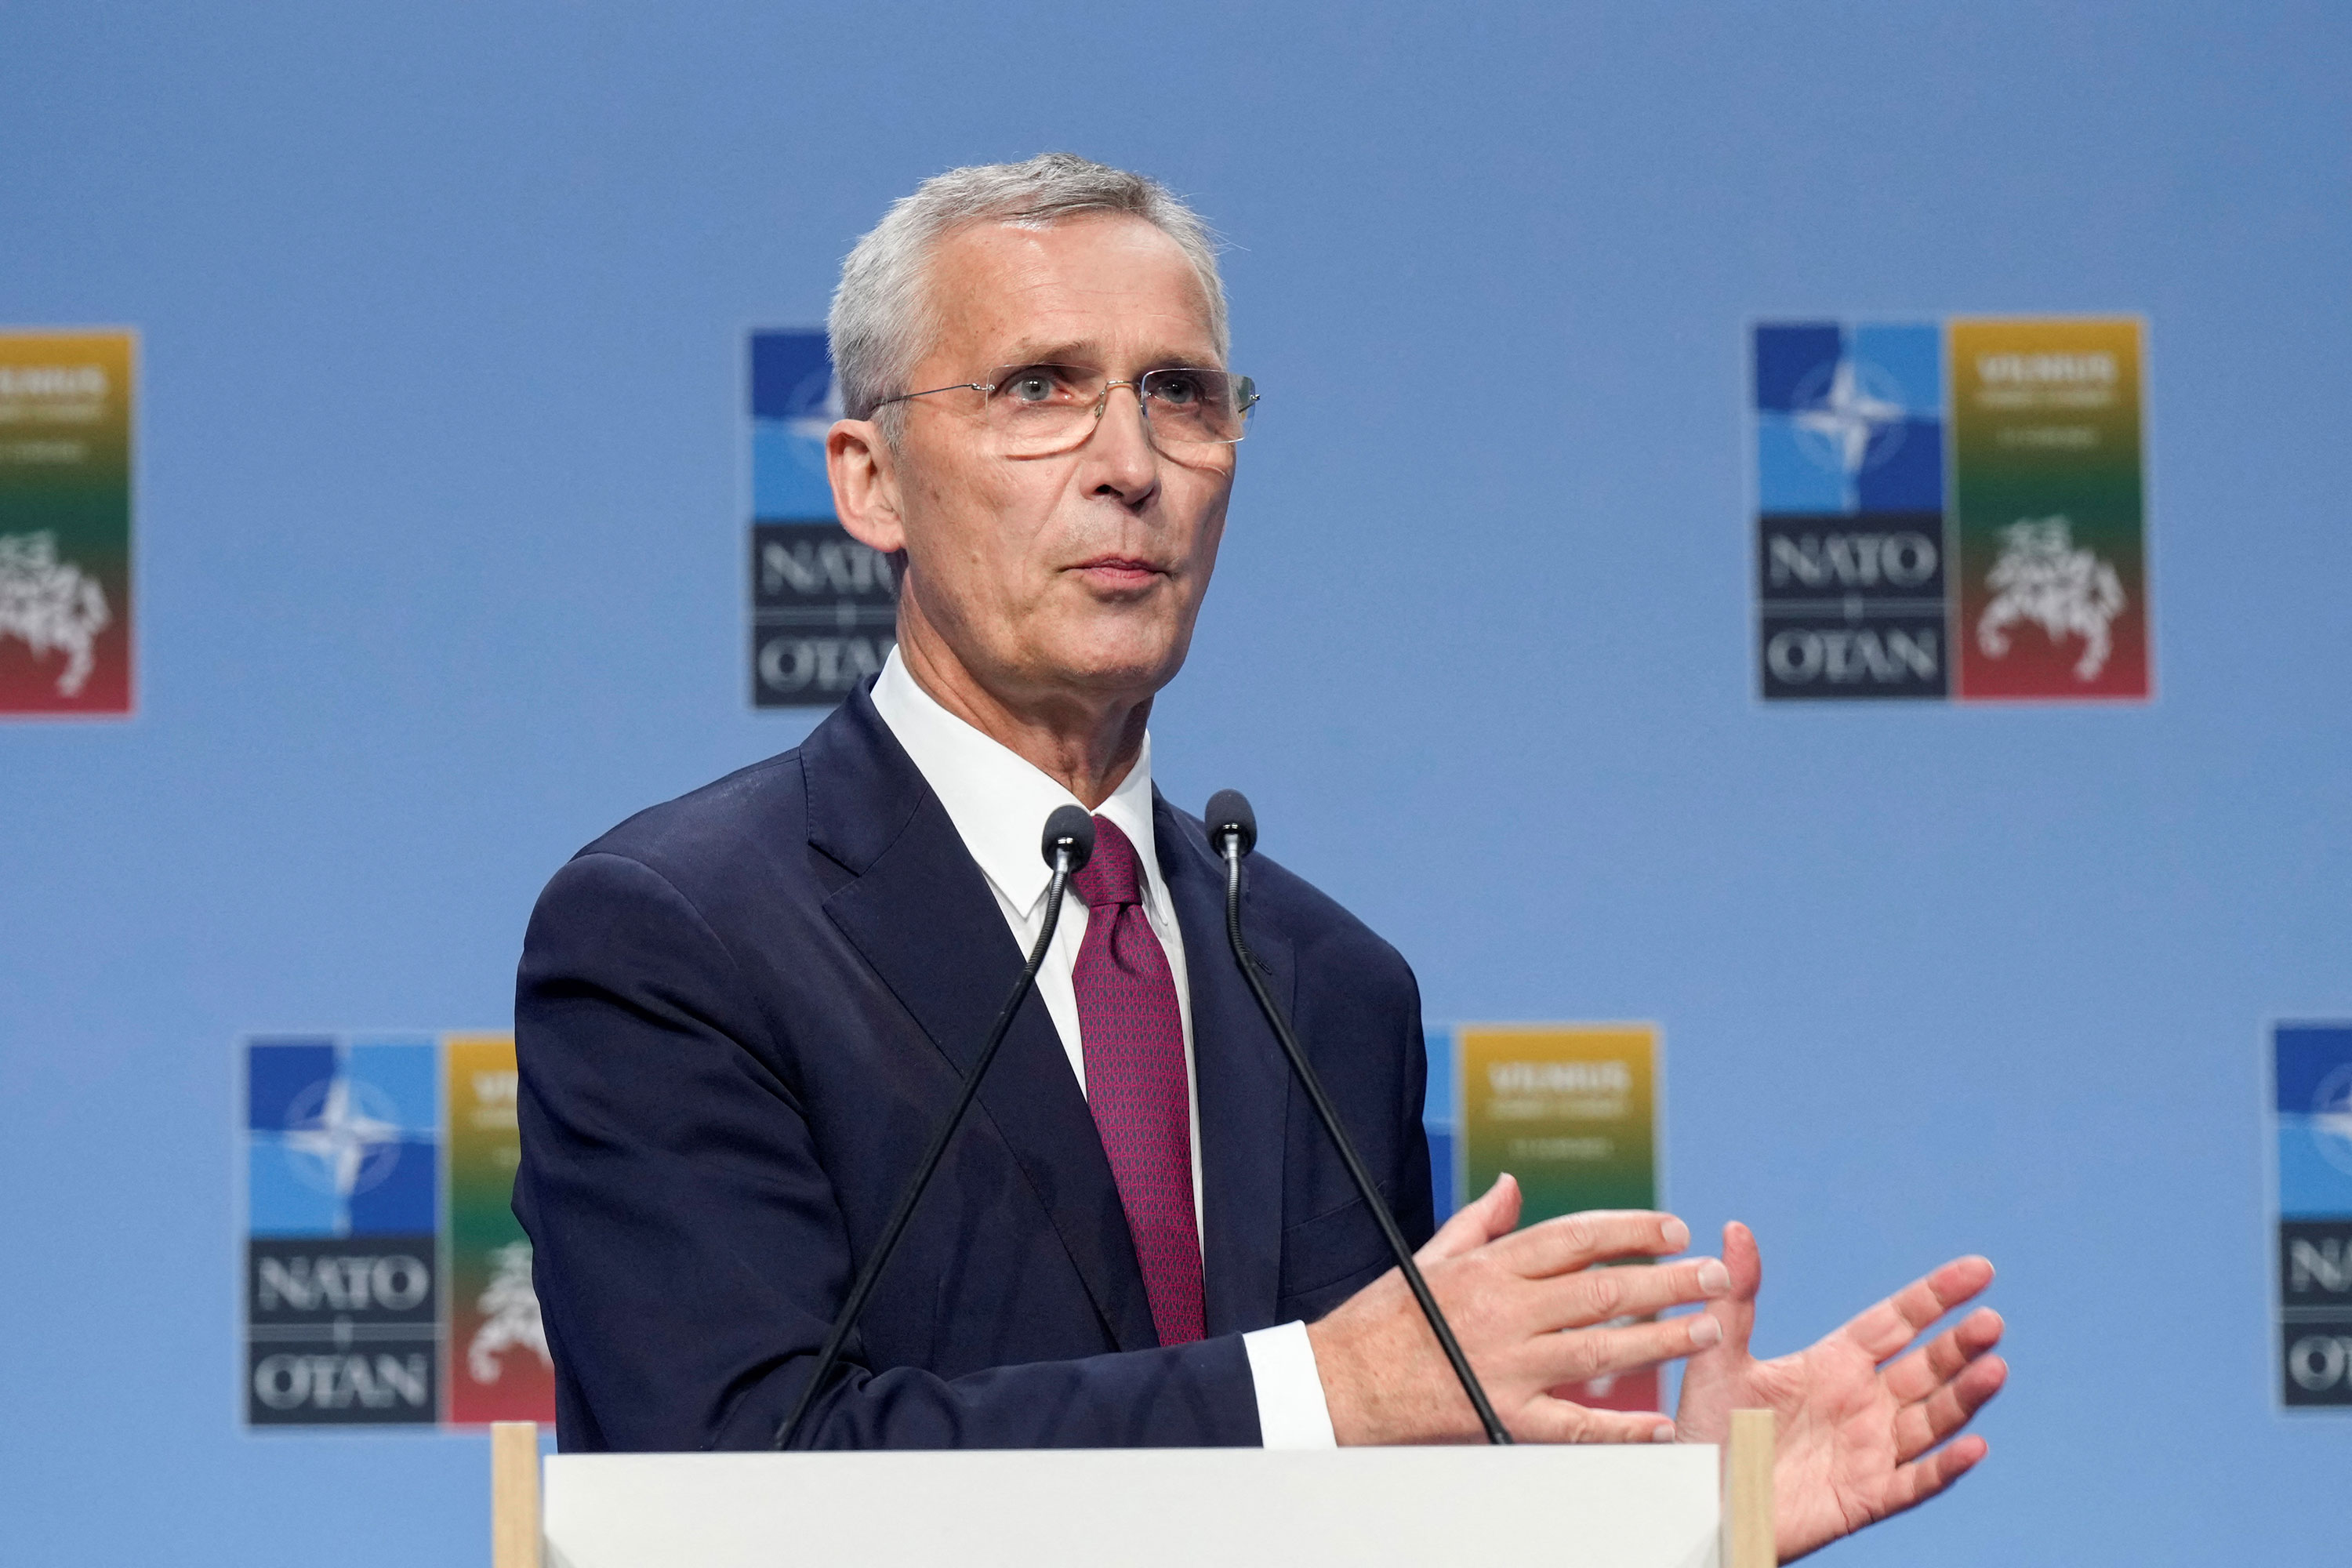 NATO Secretary-General Jens Stoltenberg holds a press conference in Vilnius, Lithuania, on Tuesday.